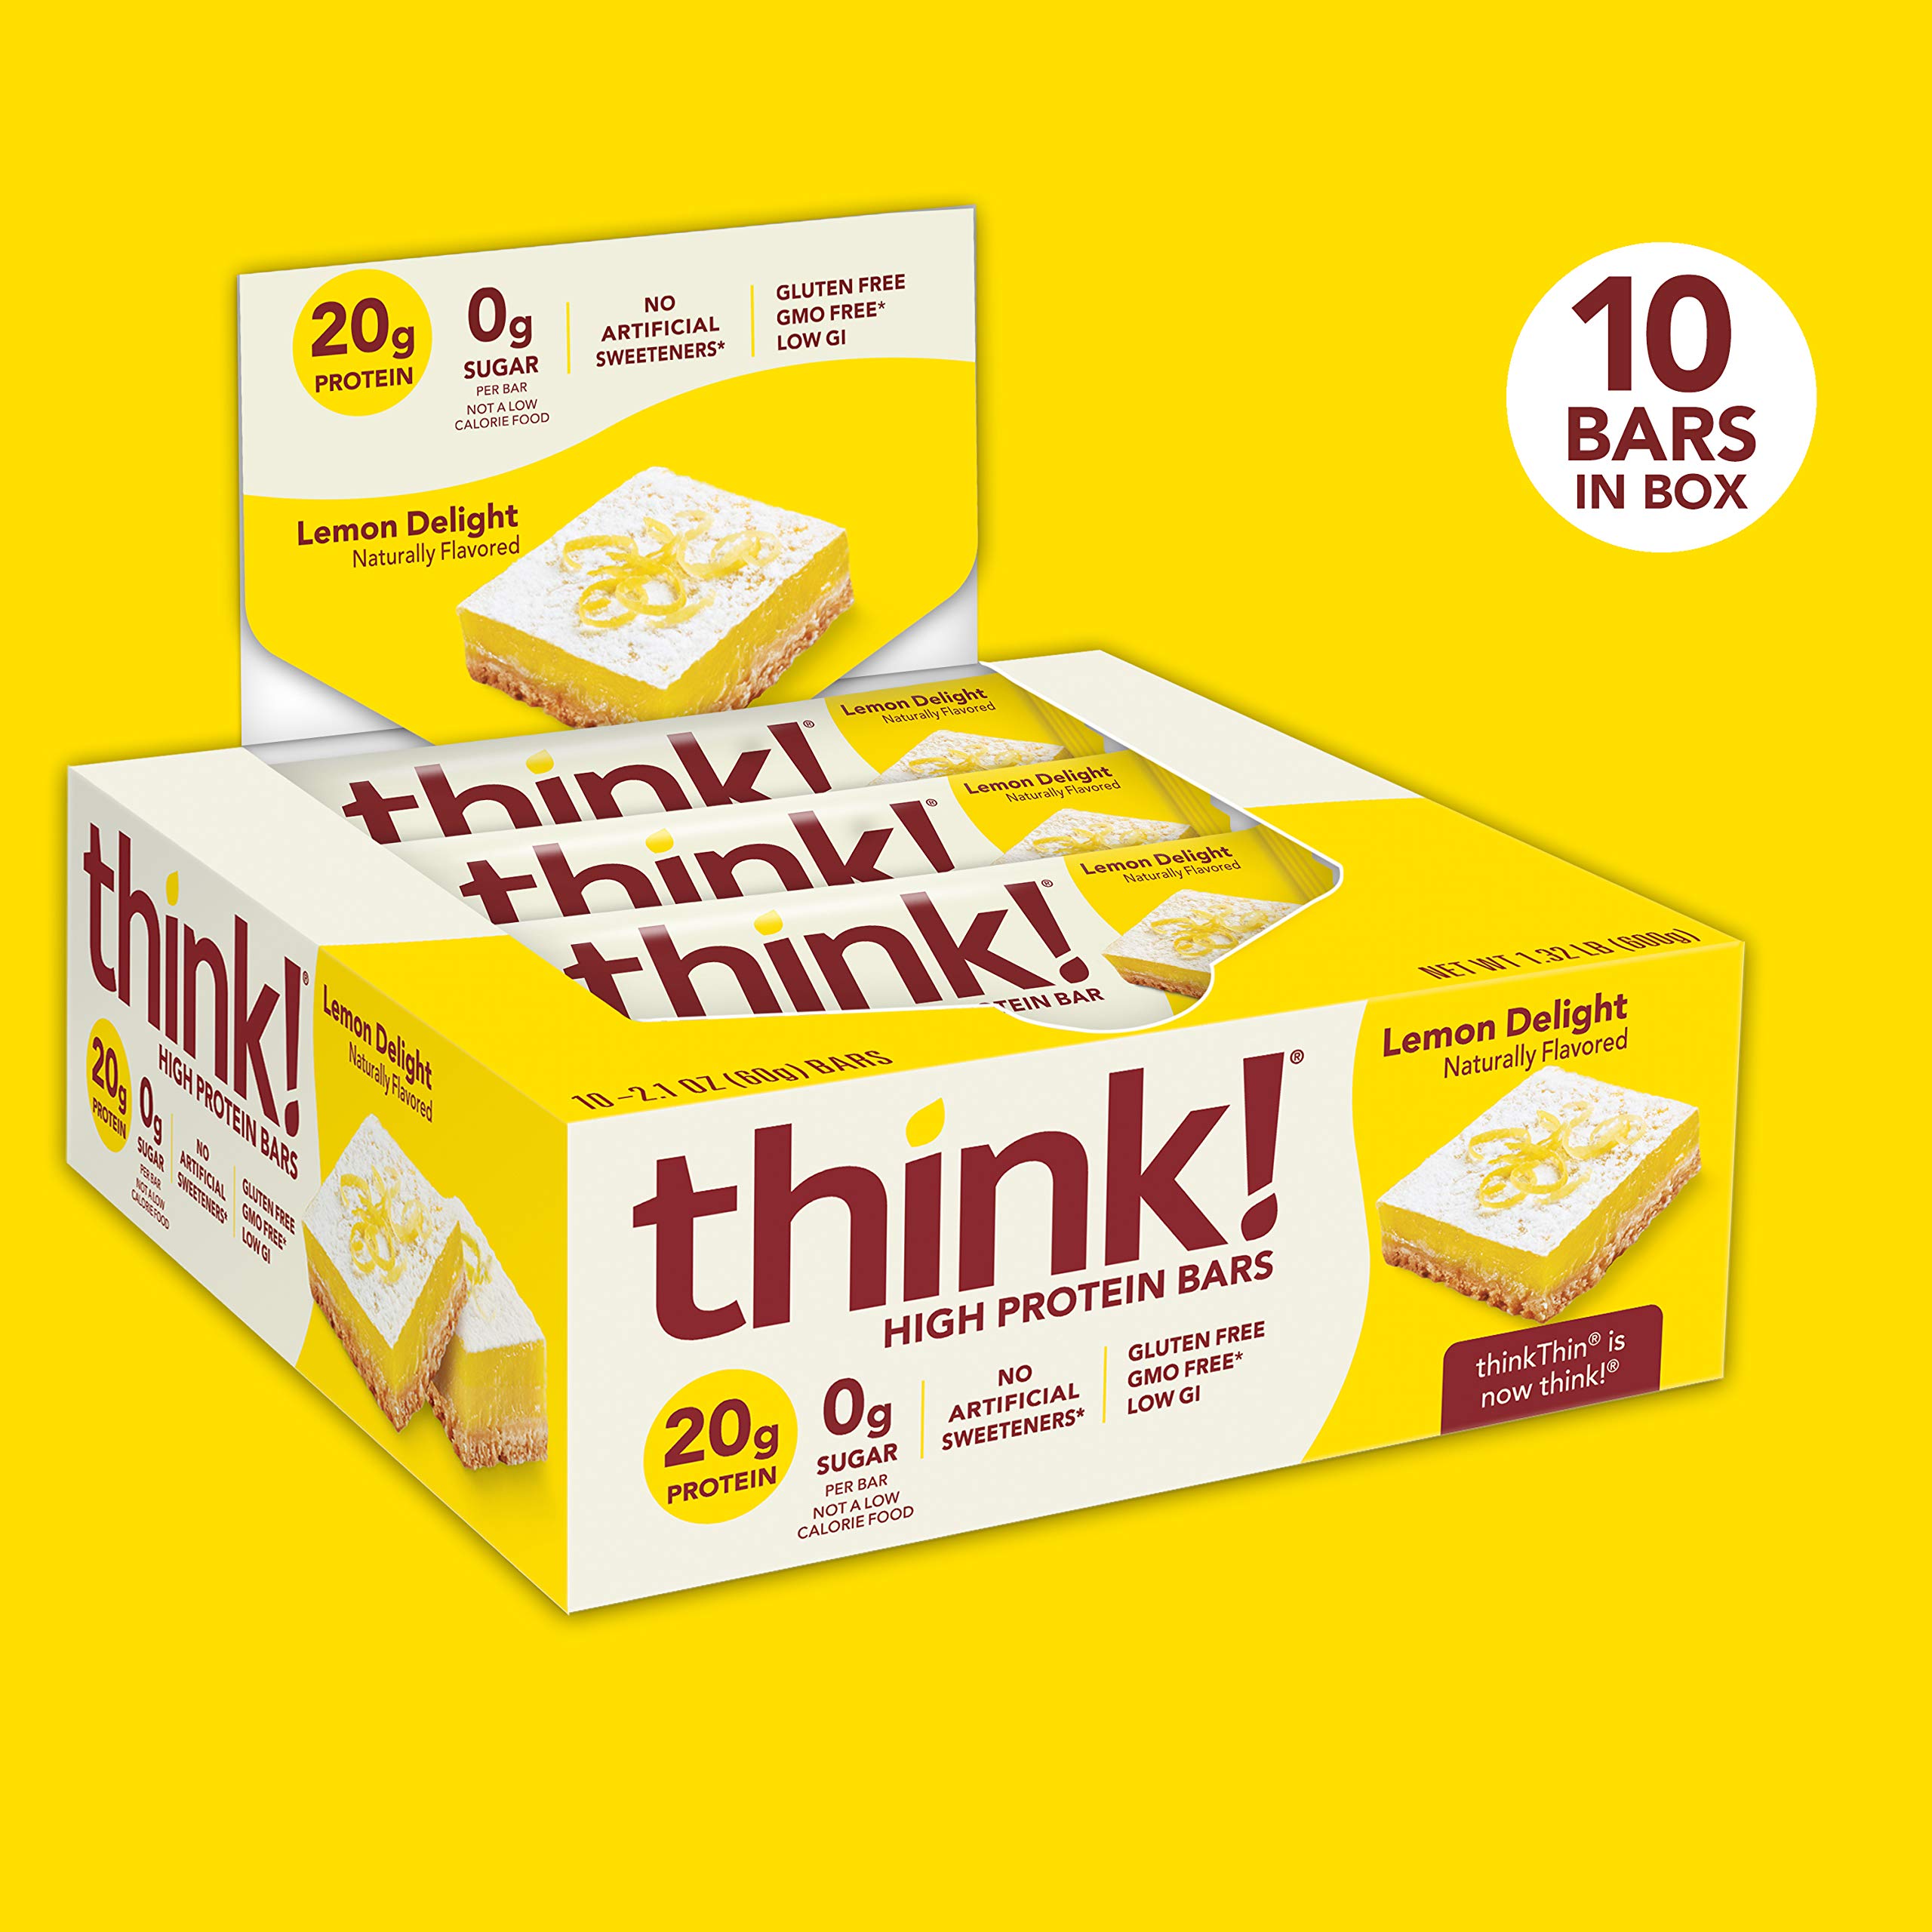 think! Protein Bars, High Protein Snacks, Gluten Free, Sugar Free Energy Bar with Whey Protein Isolate, Lemon Delight, Nutrition Bars Without Artificial Sweeteners, 2.1 Oz (10 Count)